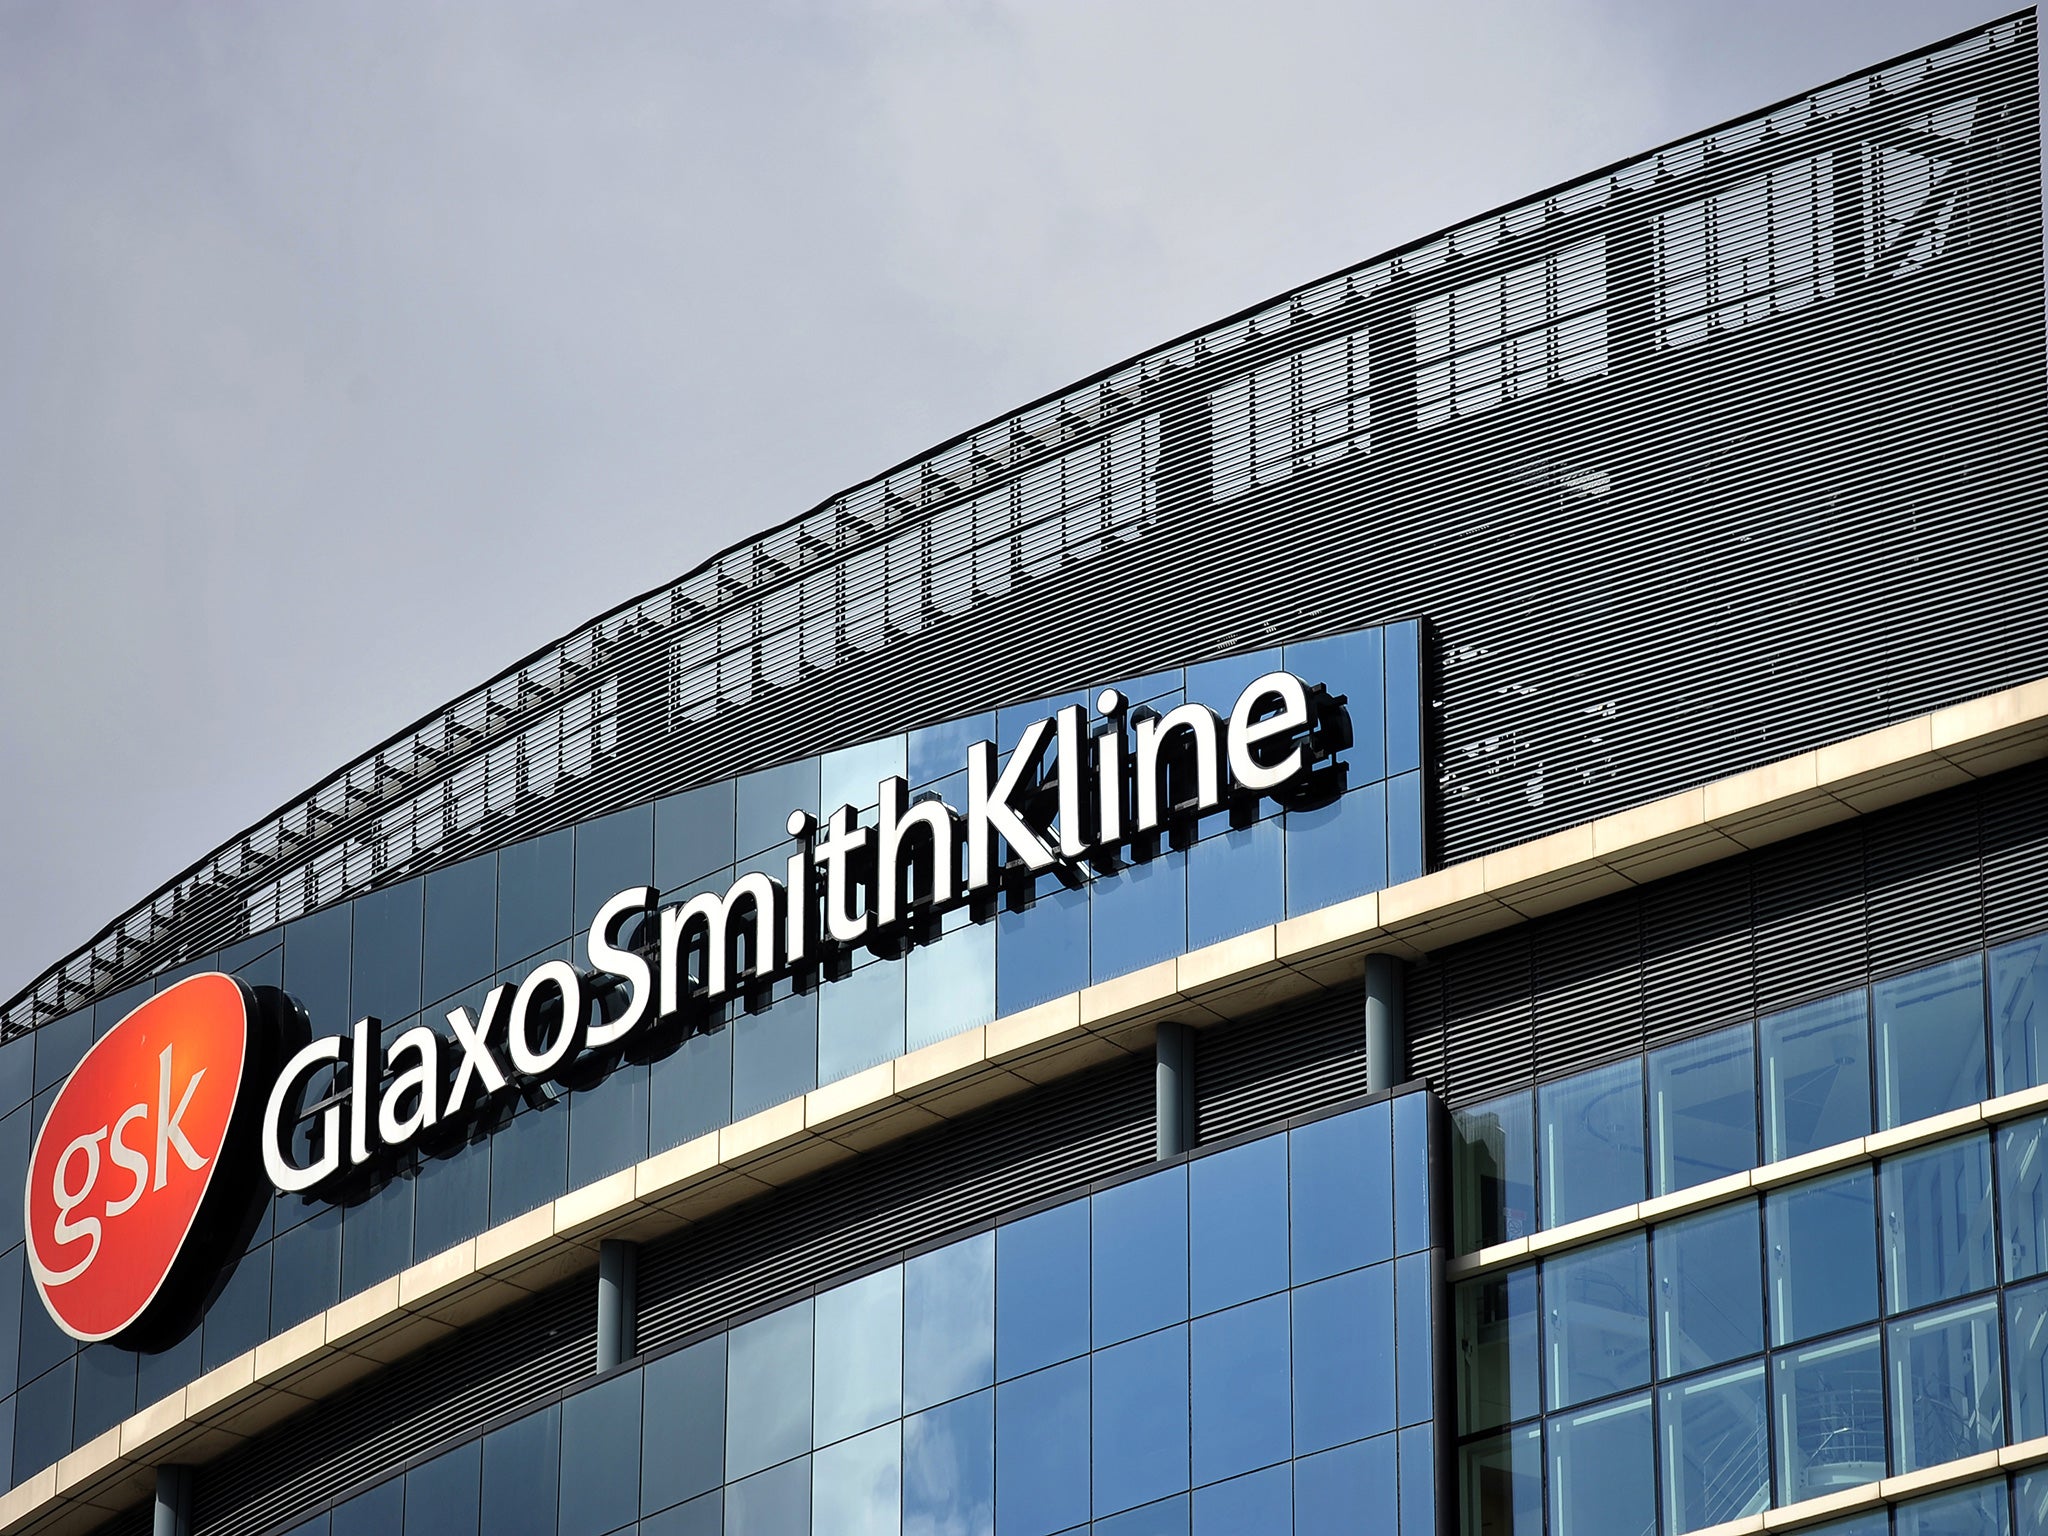 A spokesman for GSK, which manufactures Pandremix, said: “Patient safety is our number one priority and we are actively researching the observed association between Pandemrix and narcolepsy and the interaction this vaccine might have had with other risk factors in those affected.”